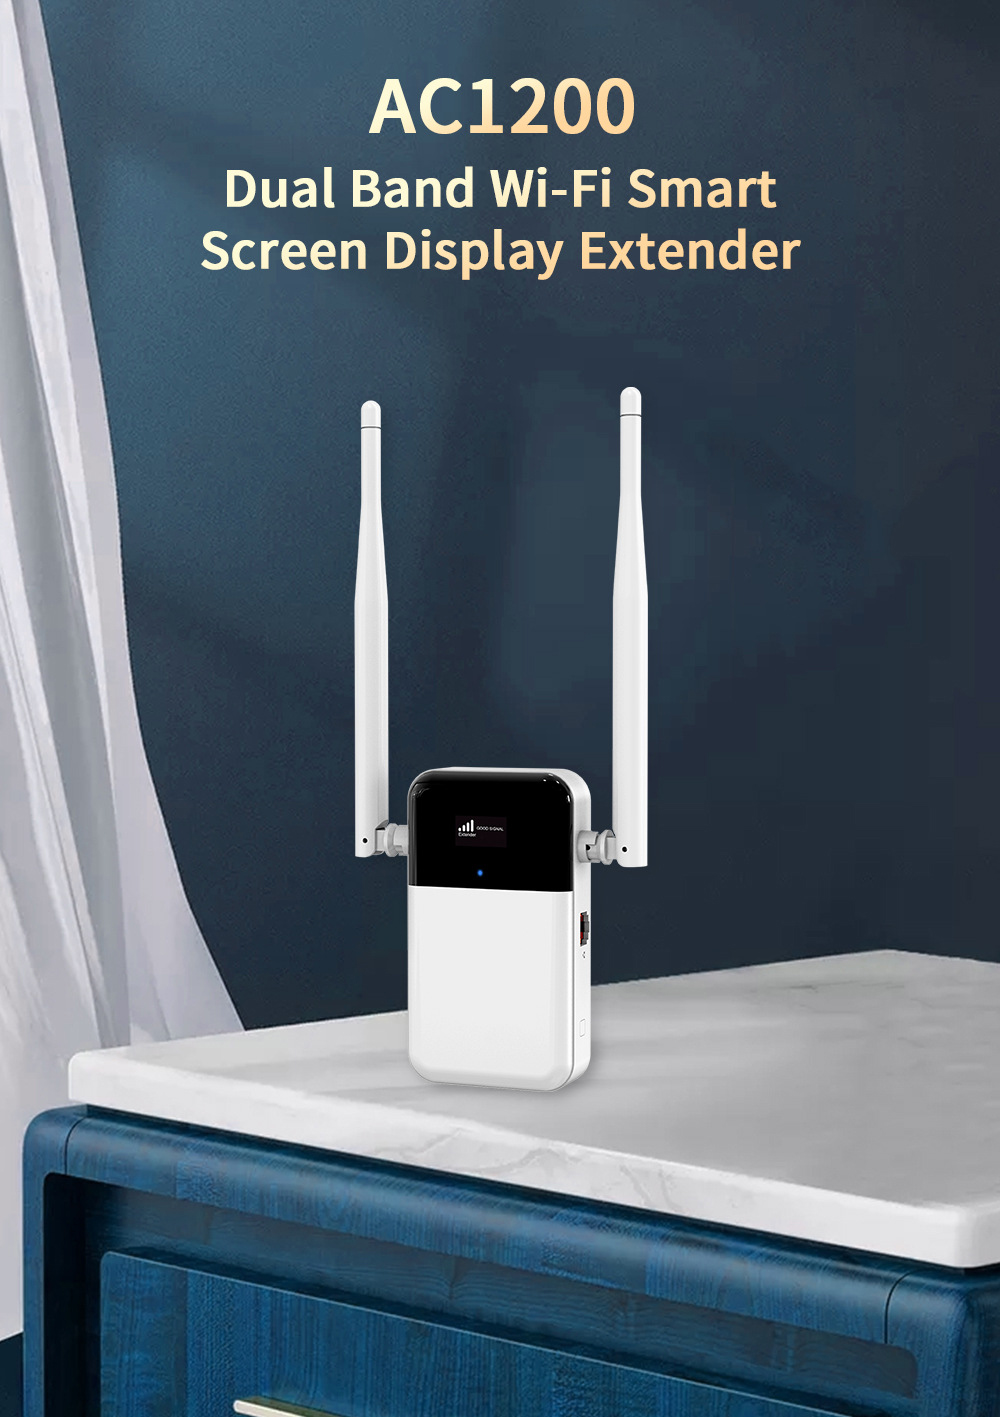 TOTOLINK-EX1200L-1200M-Wireless-Repeater-24G-5G-Dual-Band-Wi-Fi-Smart-Screen-Display-Extender-WPS-Wi-1929621-1